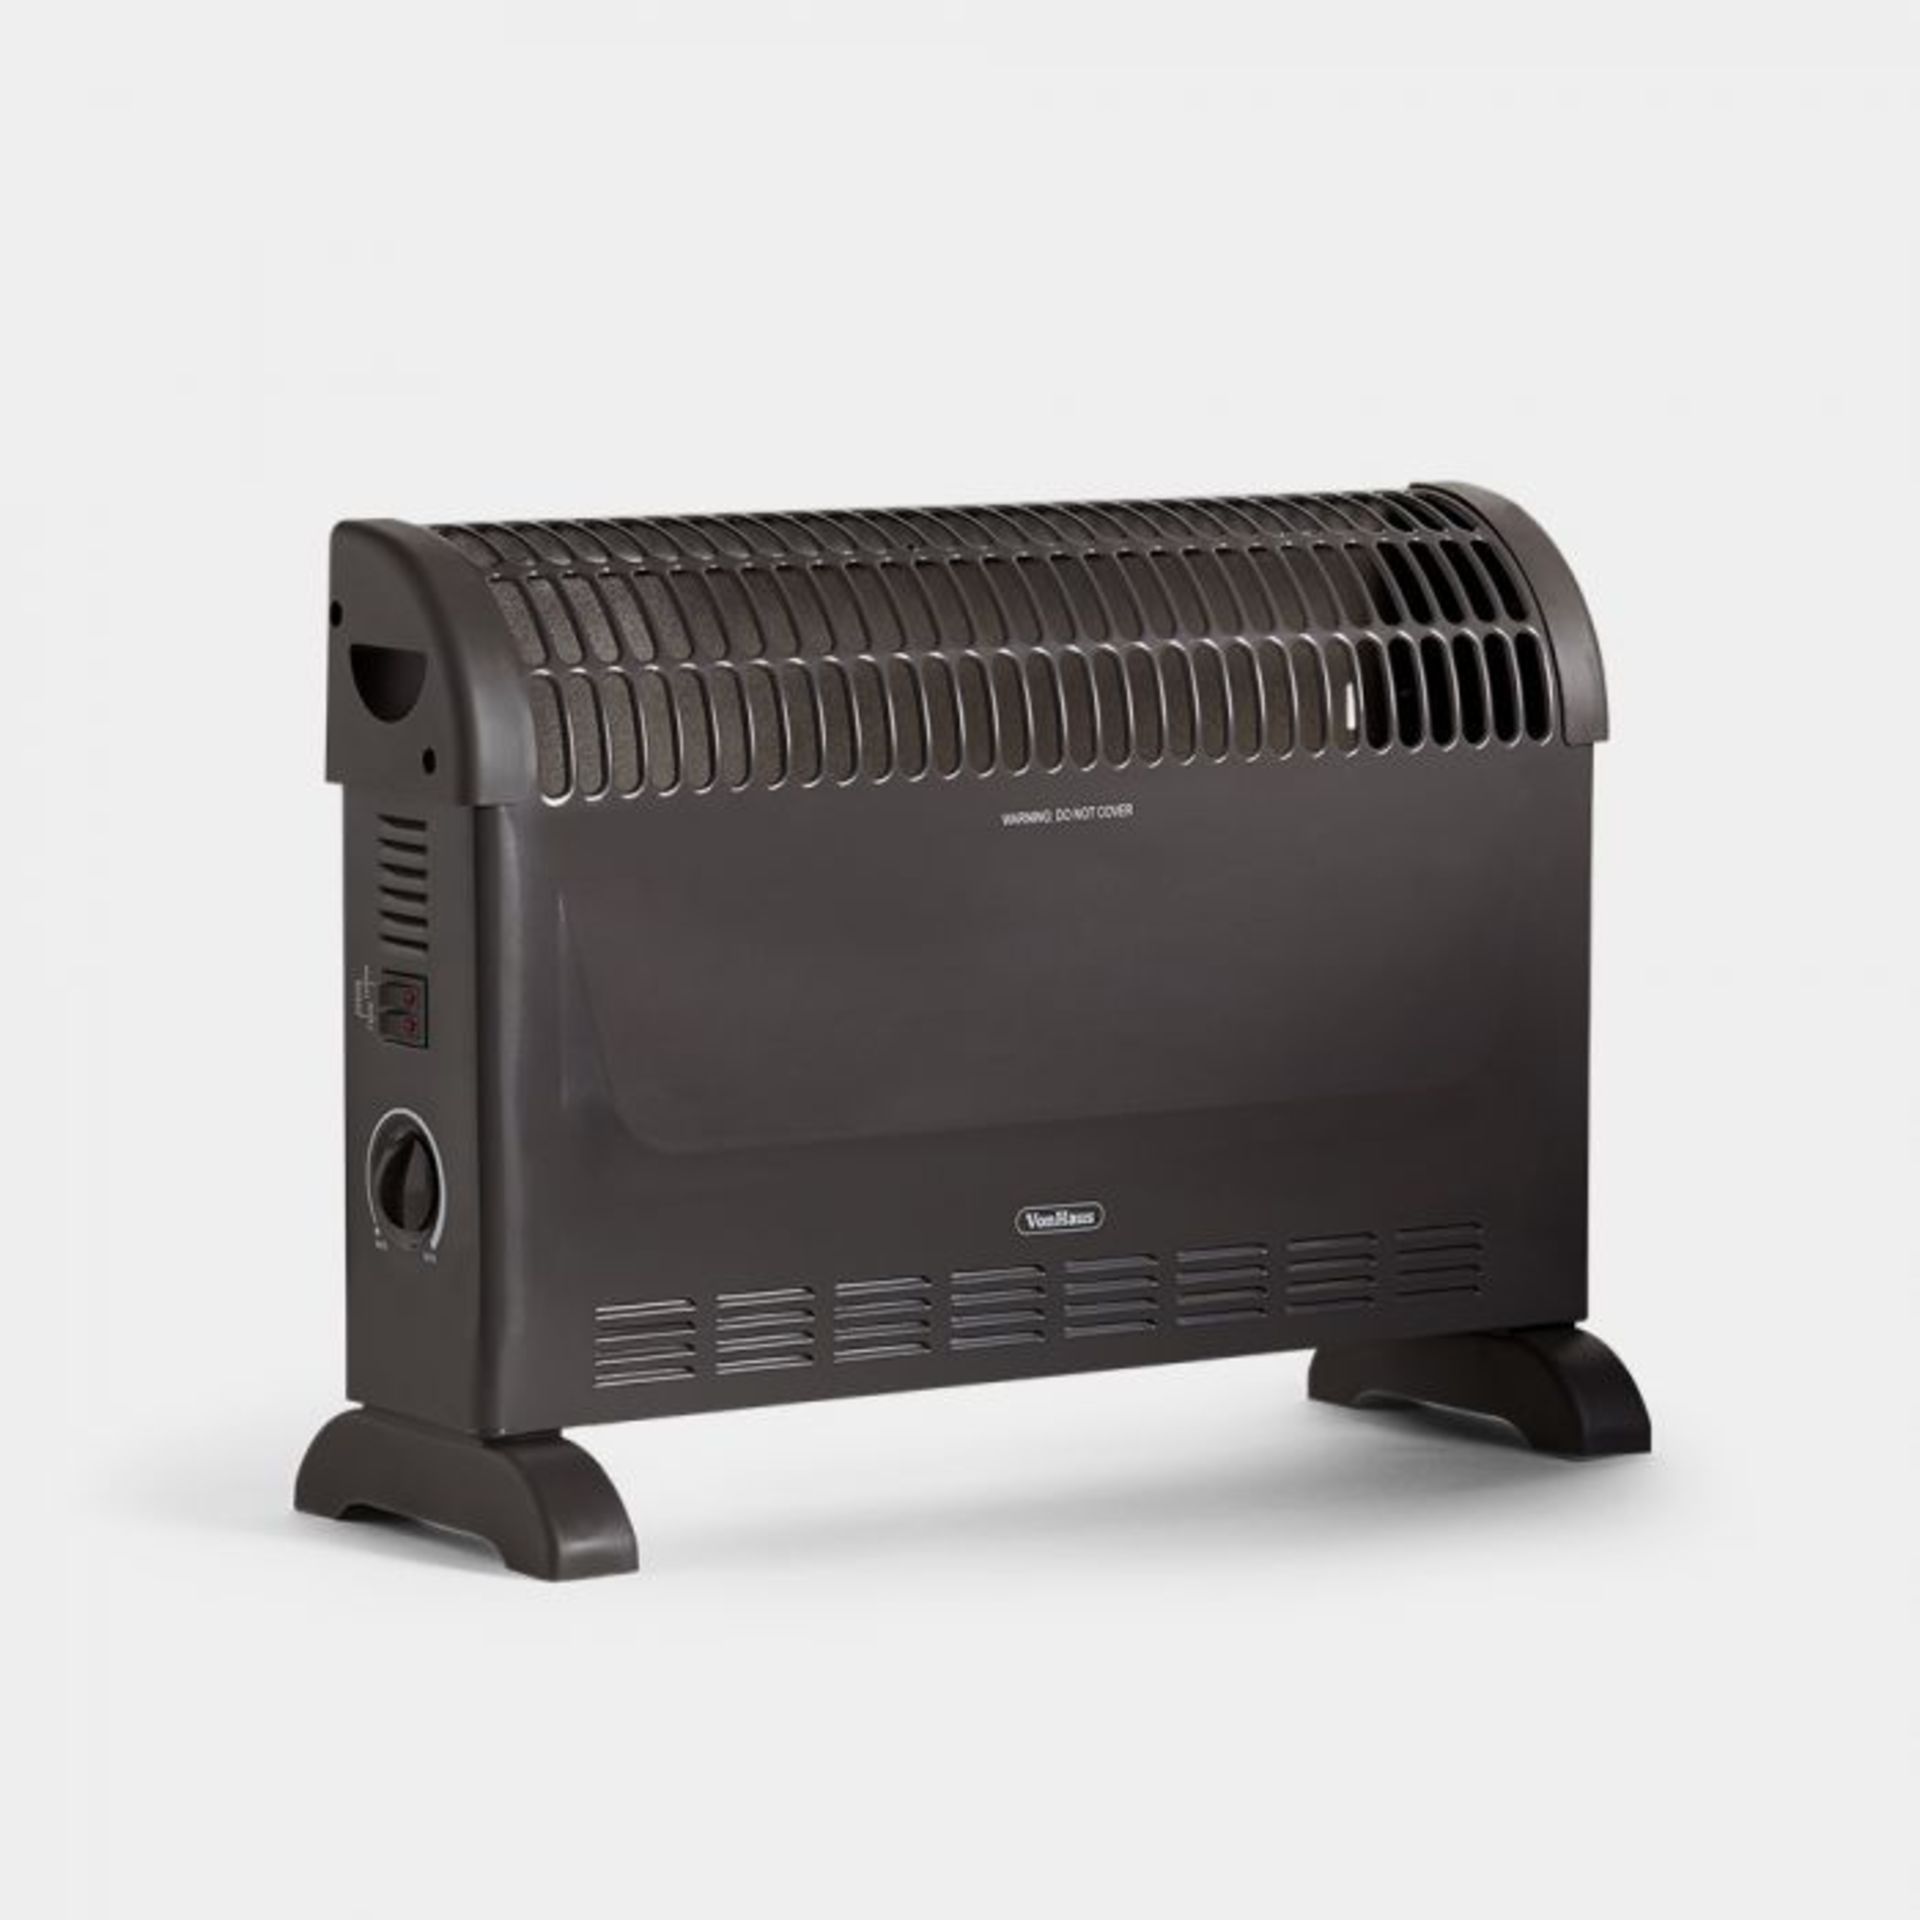 (V339) 2000W Convector Heater Handy and portable, this freestanding convector heater delivers ... - Image 2 of 2